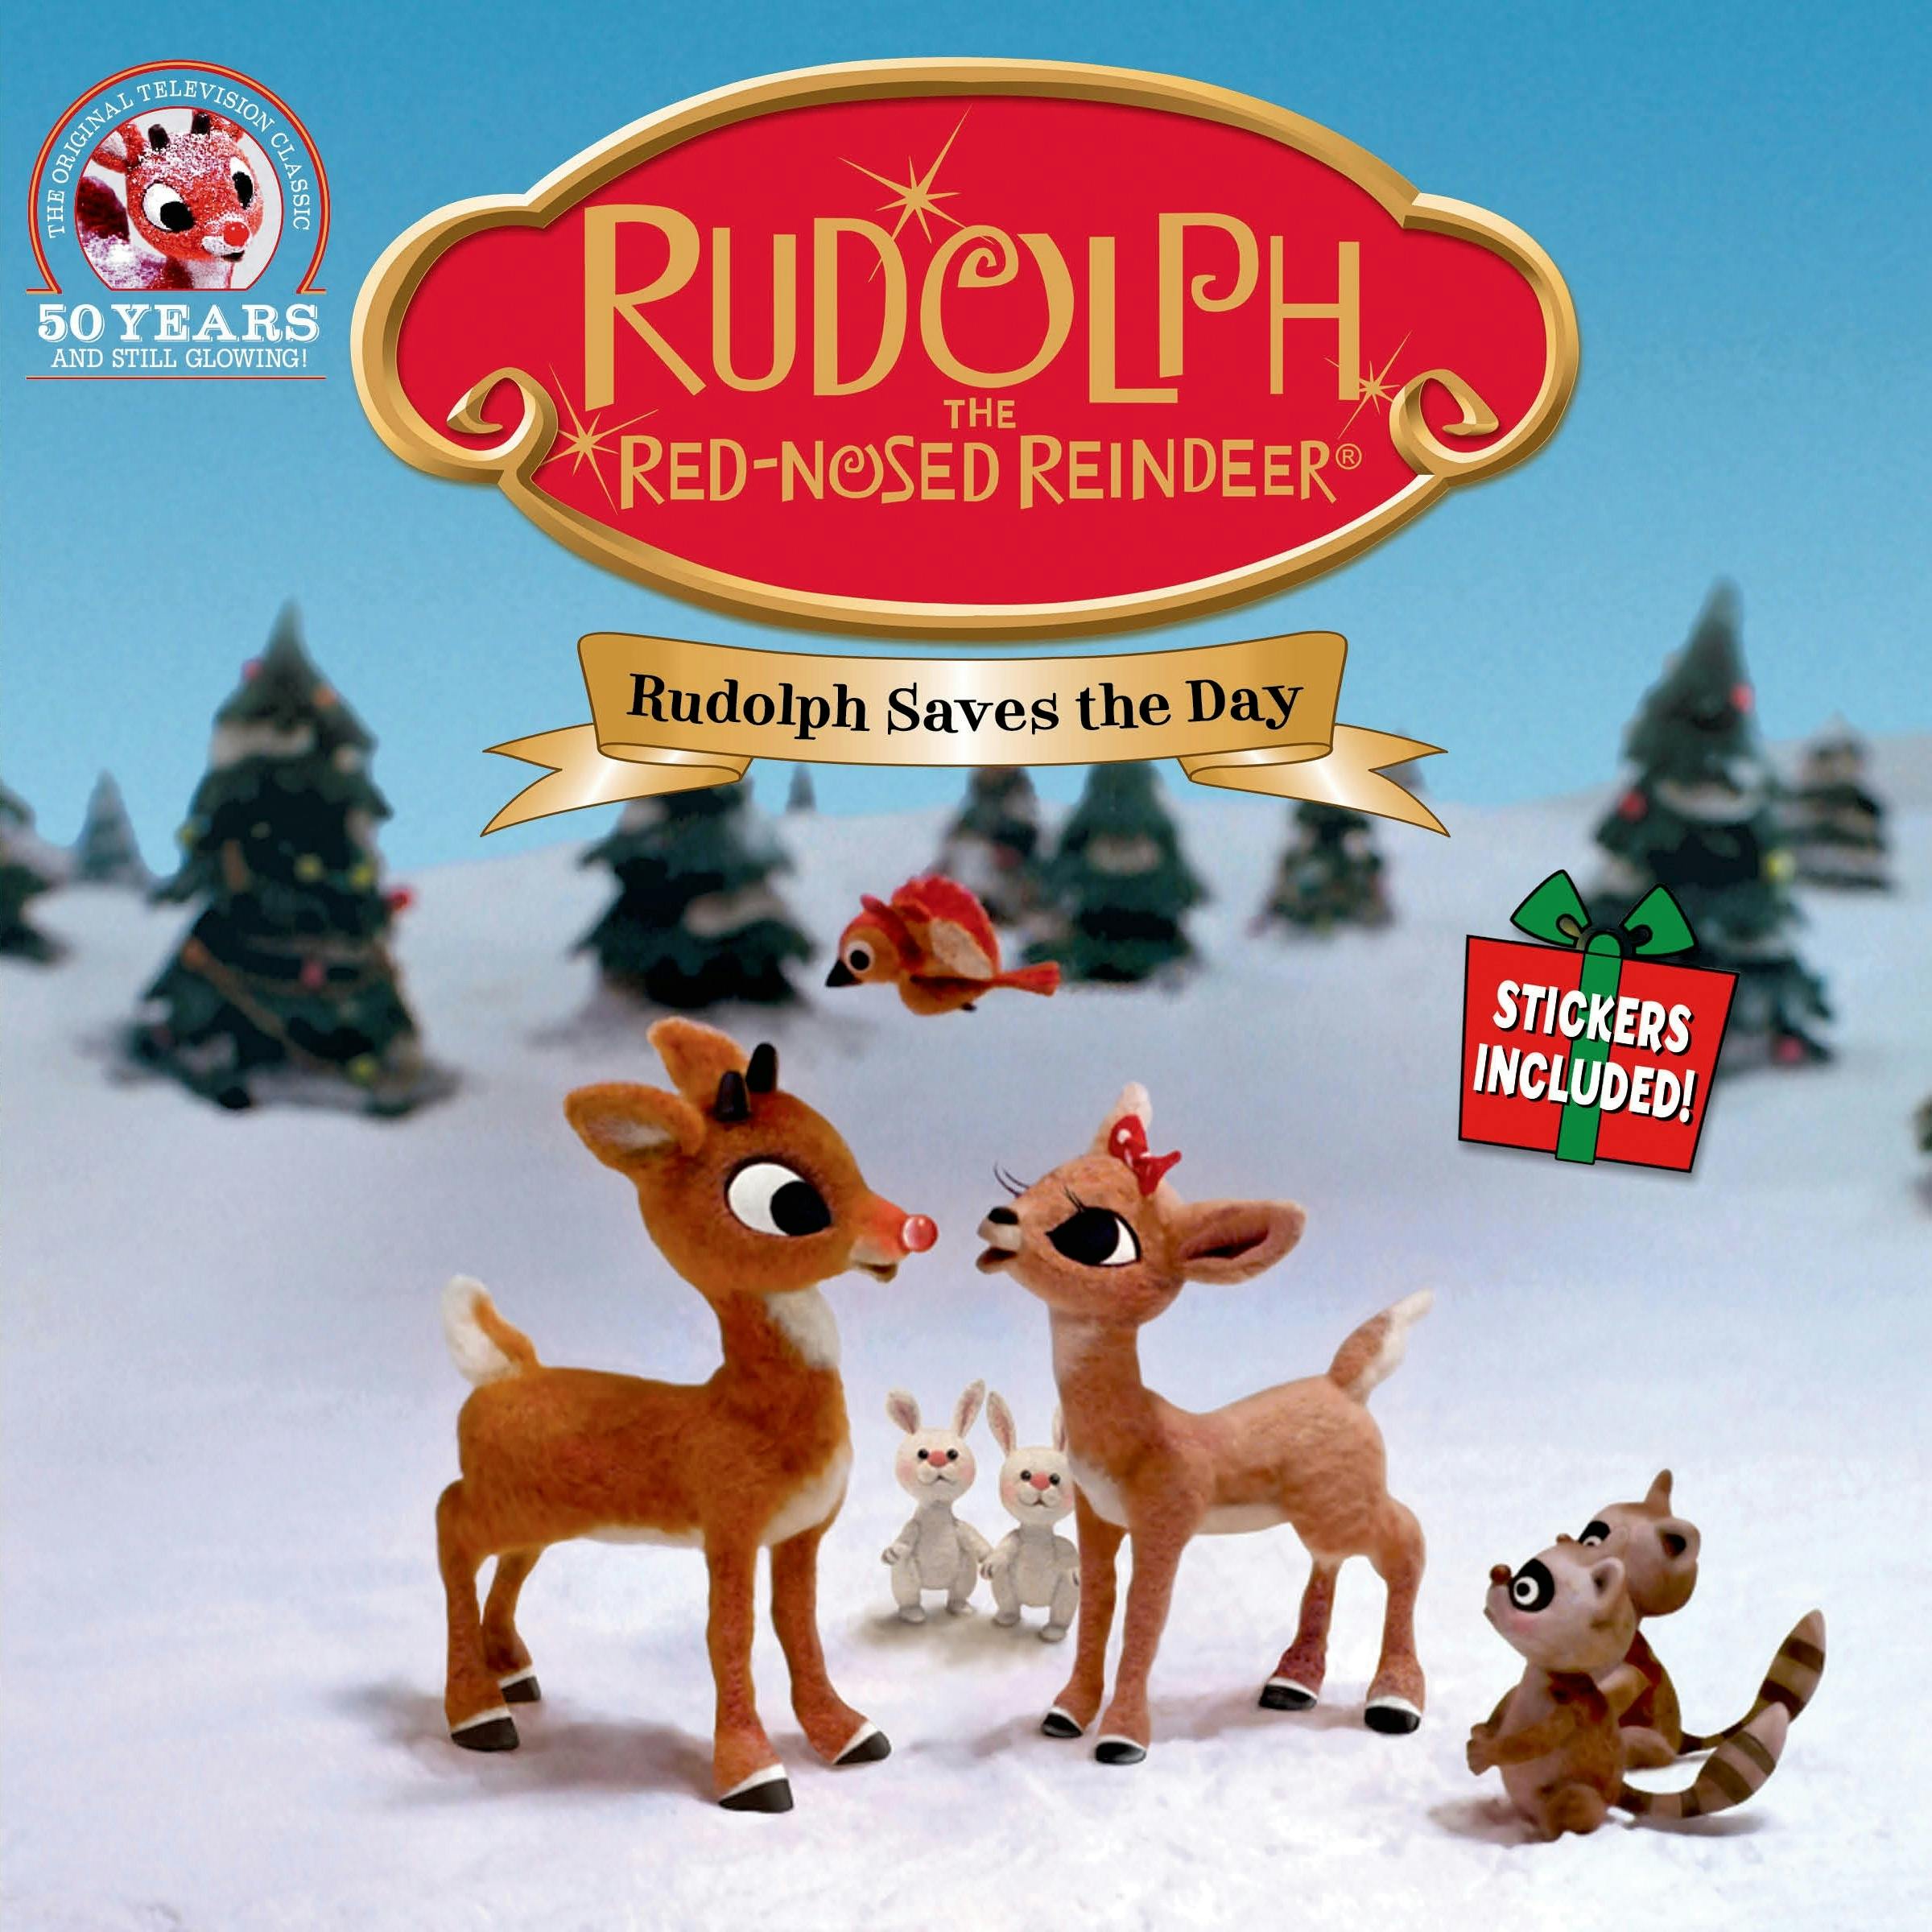 Rudolph the Red-Nosed Reindeer: Rudolph Saves the Day